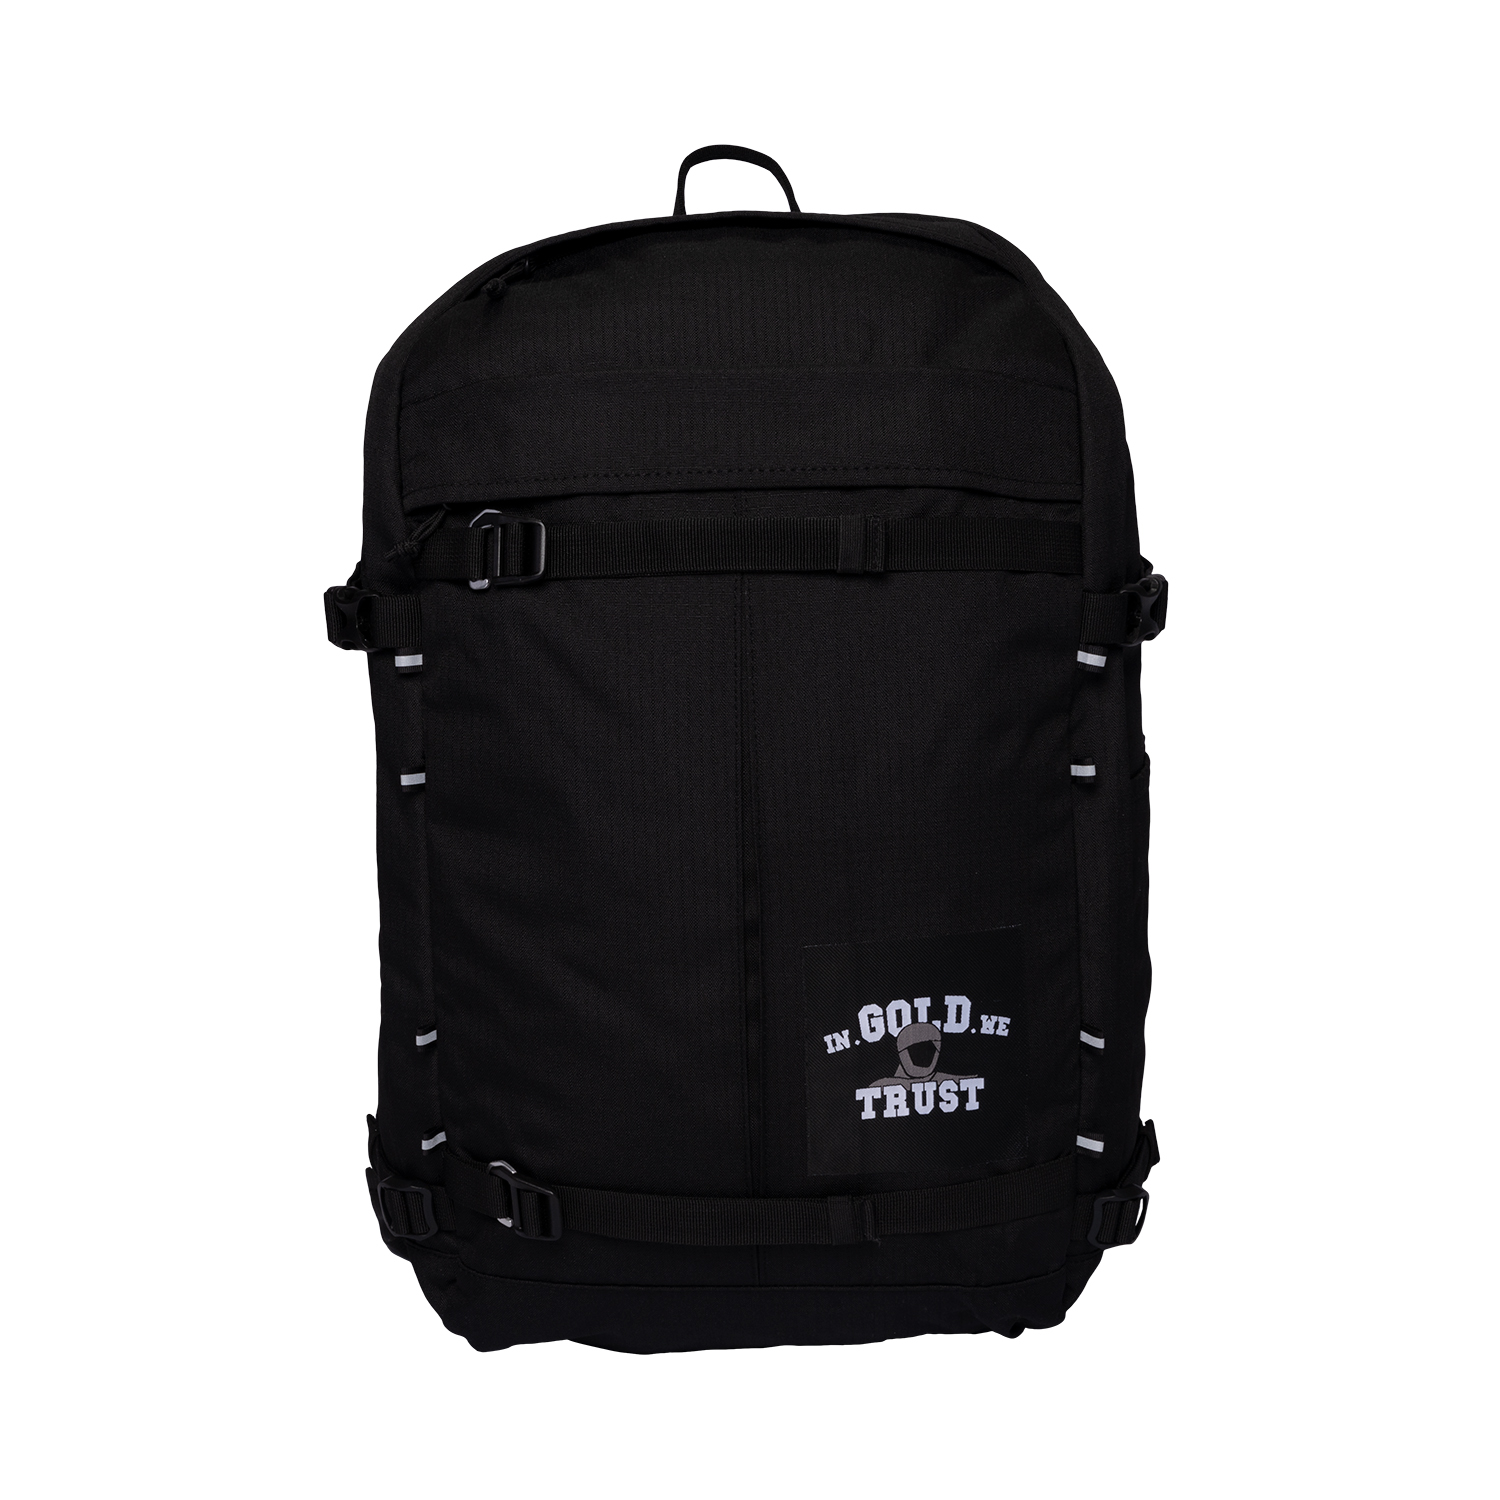 Dauphine Large Backpack – Snowsport